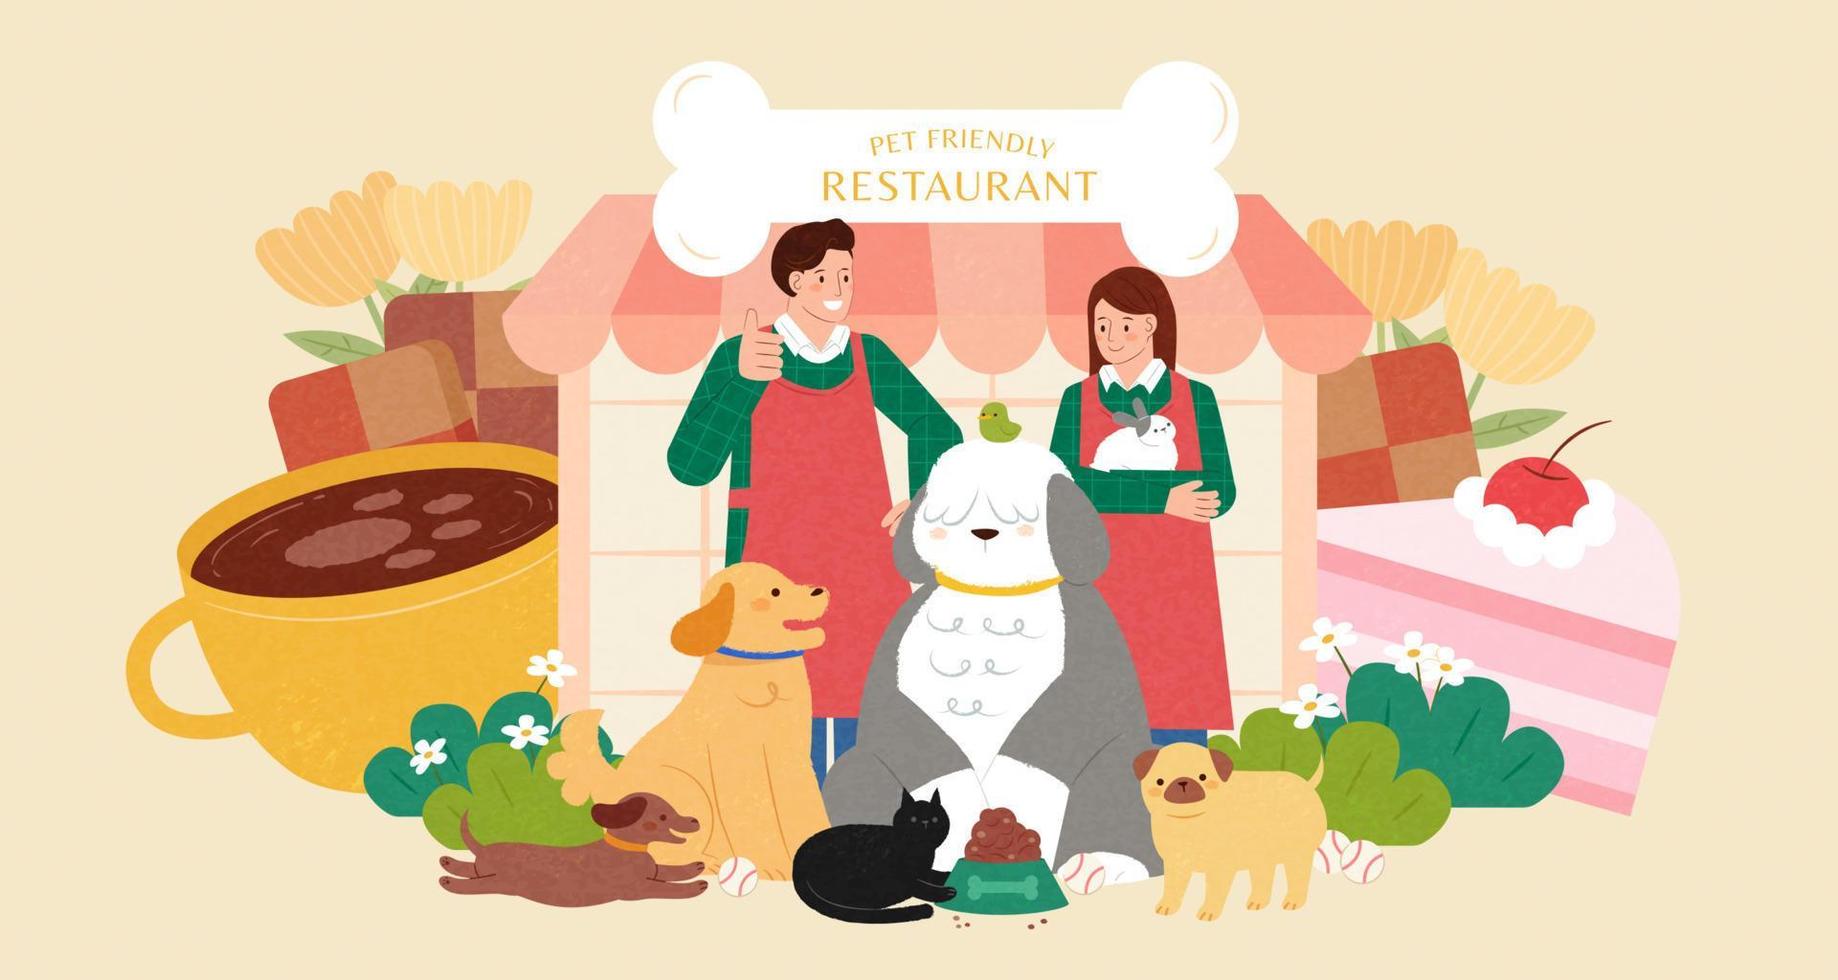 Pet friendly restaurant. Flat illustration of pet friendly cafe owners welcoming different types of domestic animals to visit at the entrance vector